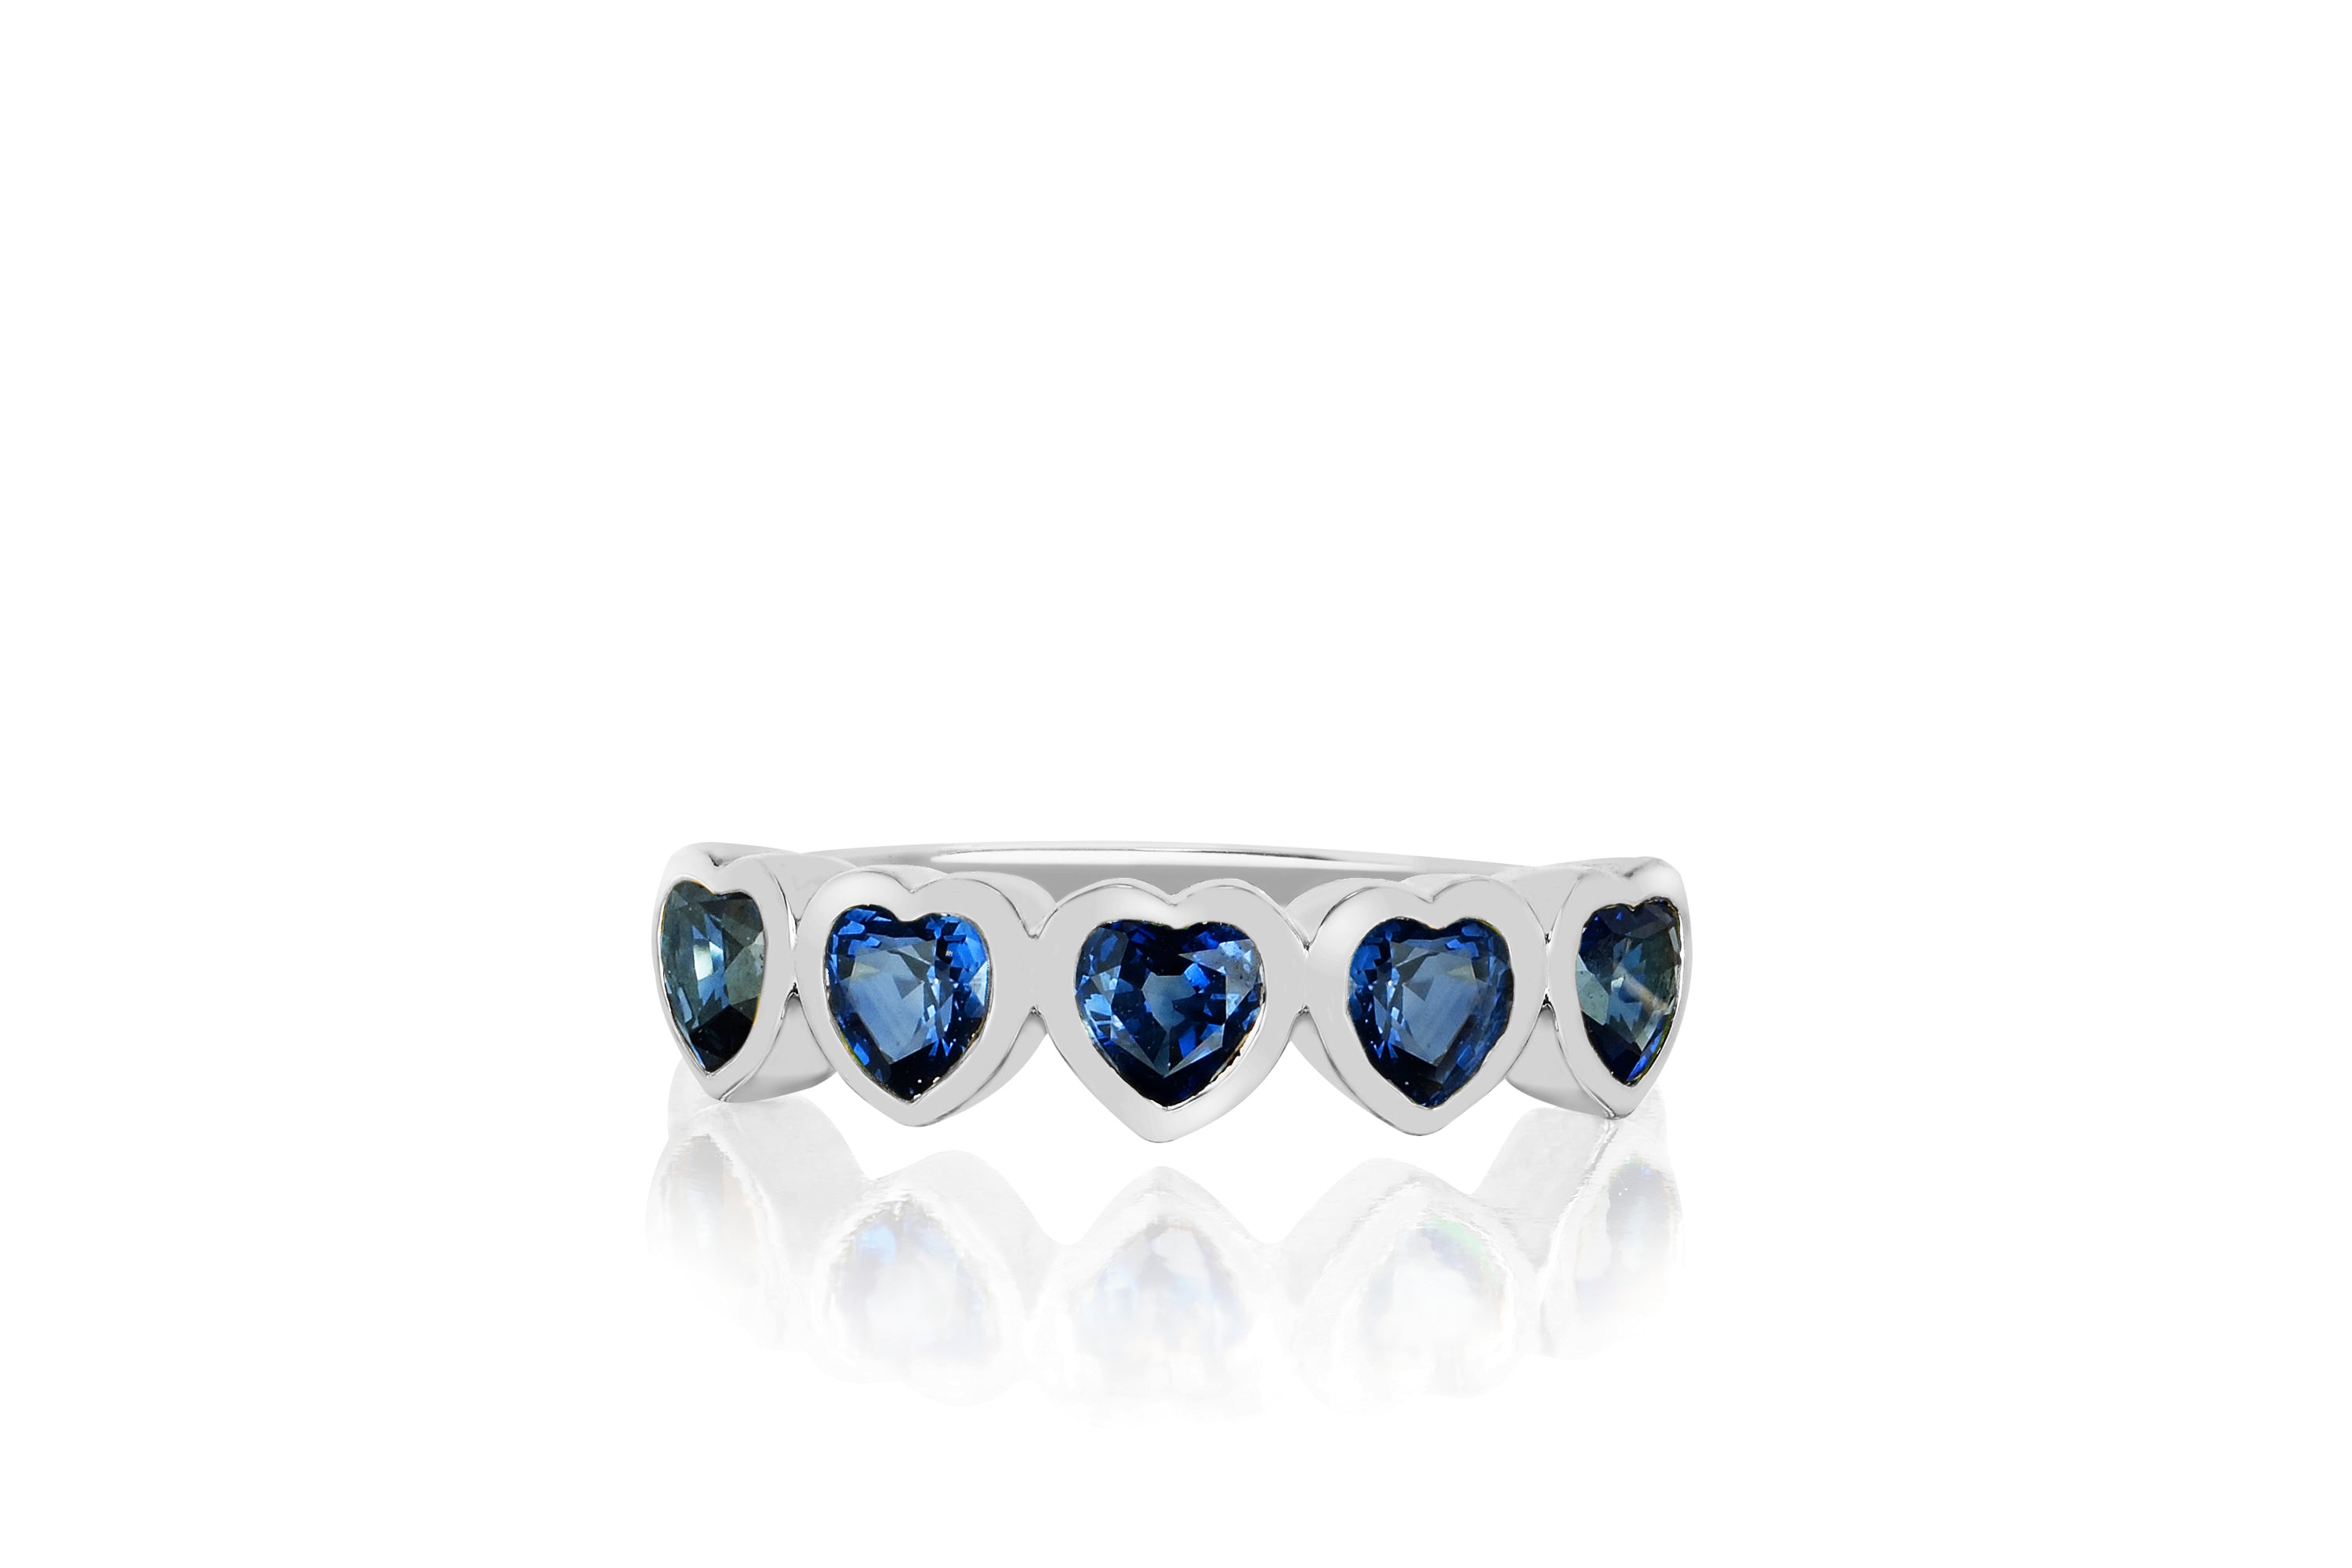 14k (karat) white gold ring with 5 blue sapphire jeweled hearts circling the top of the ring.